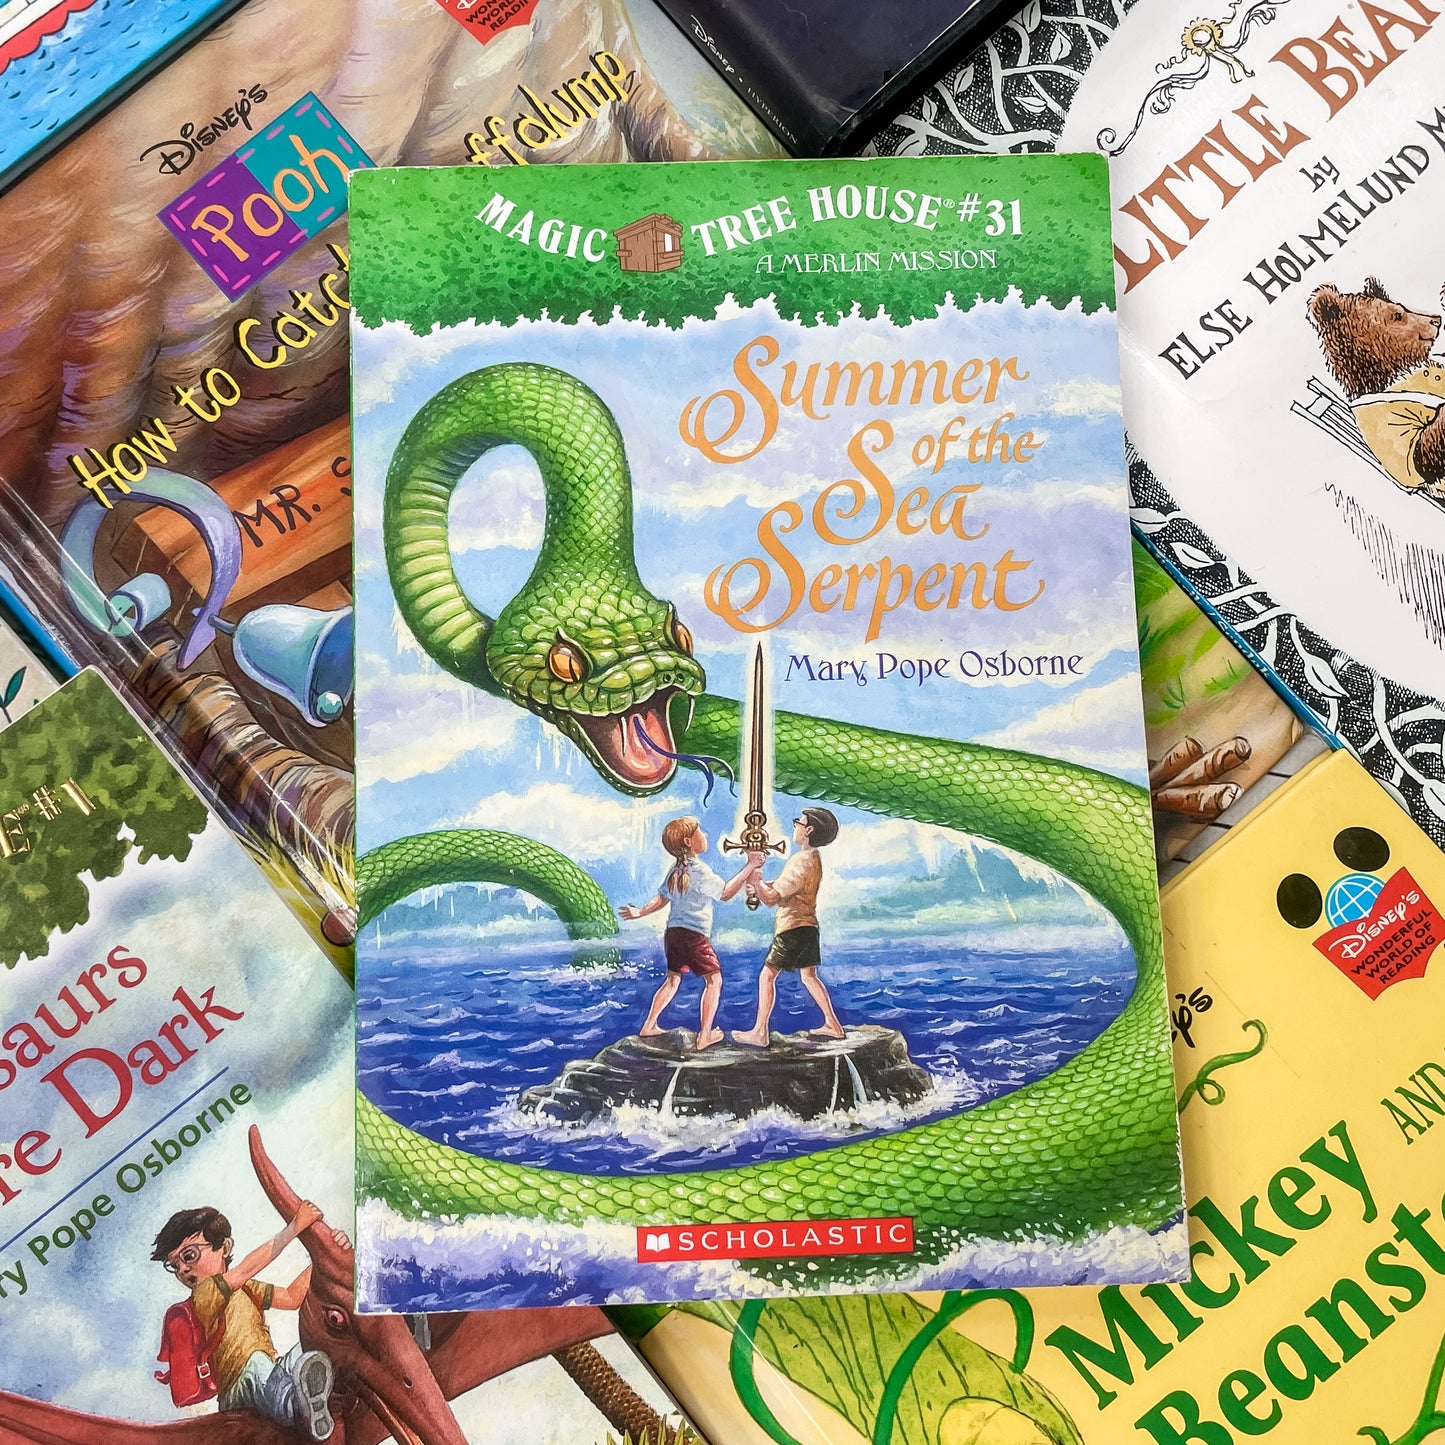 Summer of the Sea Serpent by Mary Pope Osborne (Magic Tree House: A Merlin Mission #31)